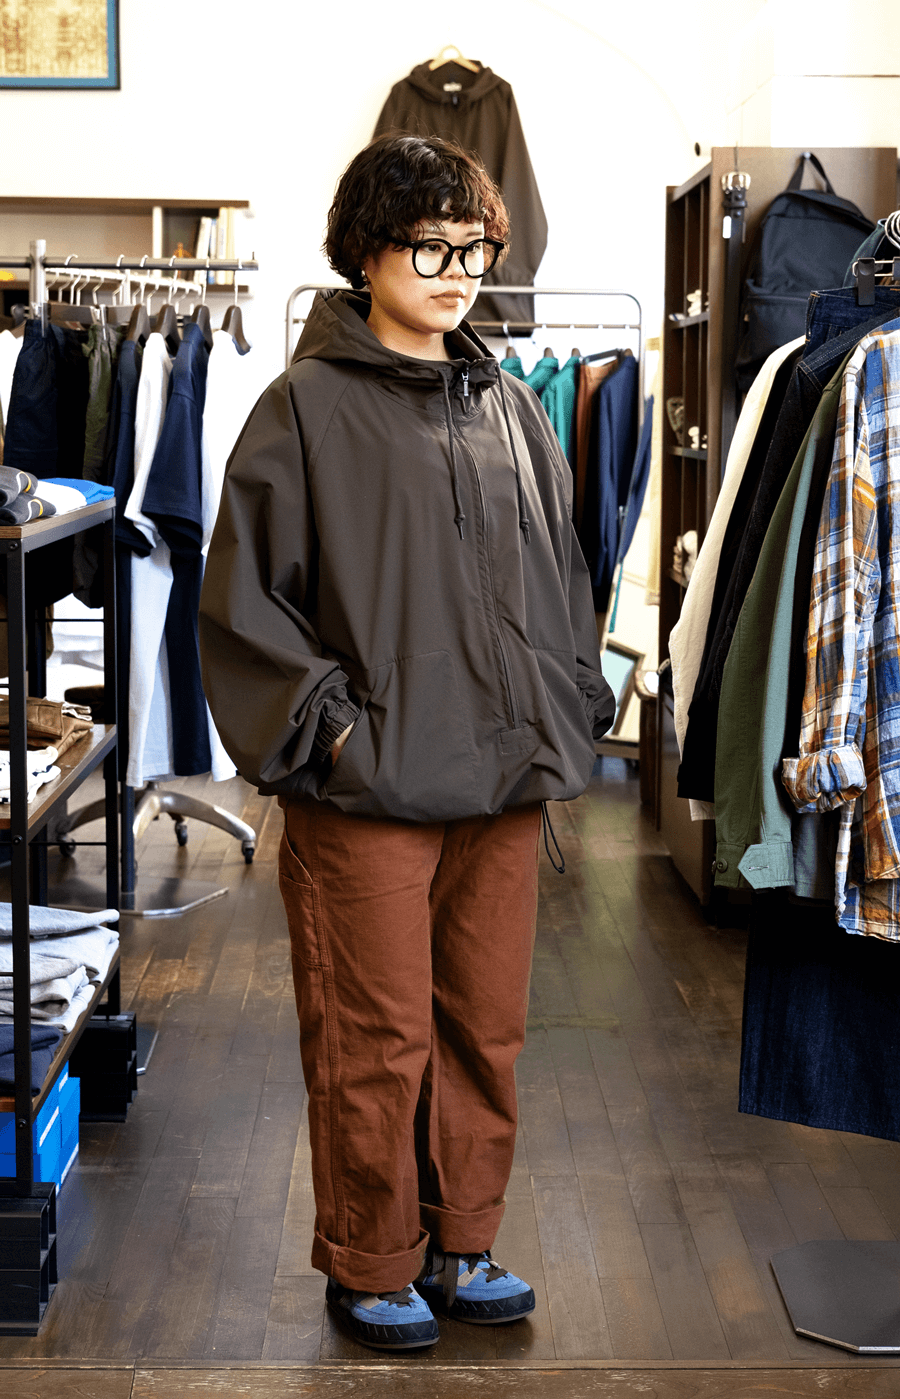 ts(s) “SOLOTEX” Polyester 2 Way Stertch Cloth Long Zip Pullover Parka